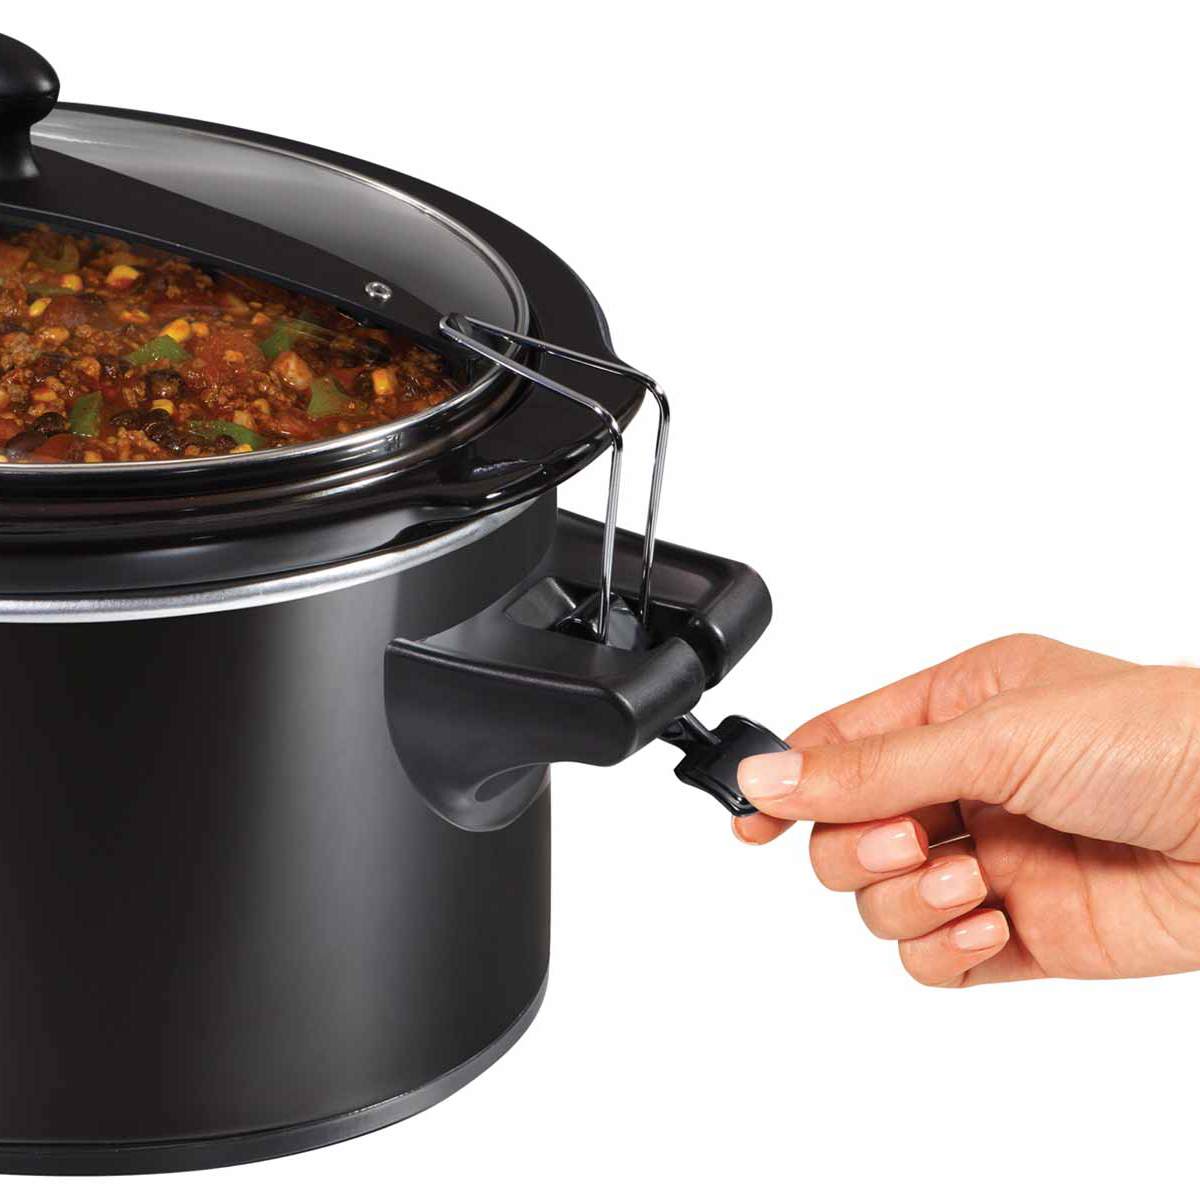 Stay or Go® 5 Quart Slow Cooker - 33957